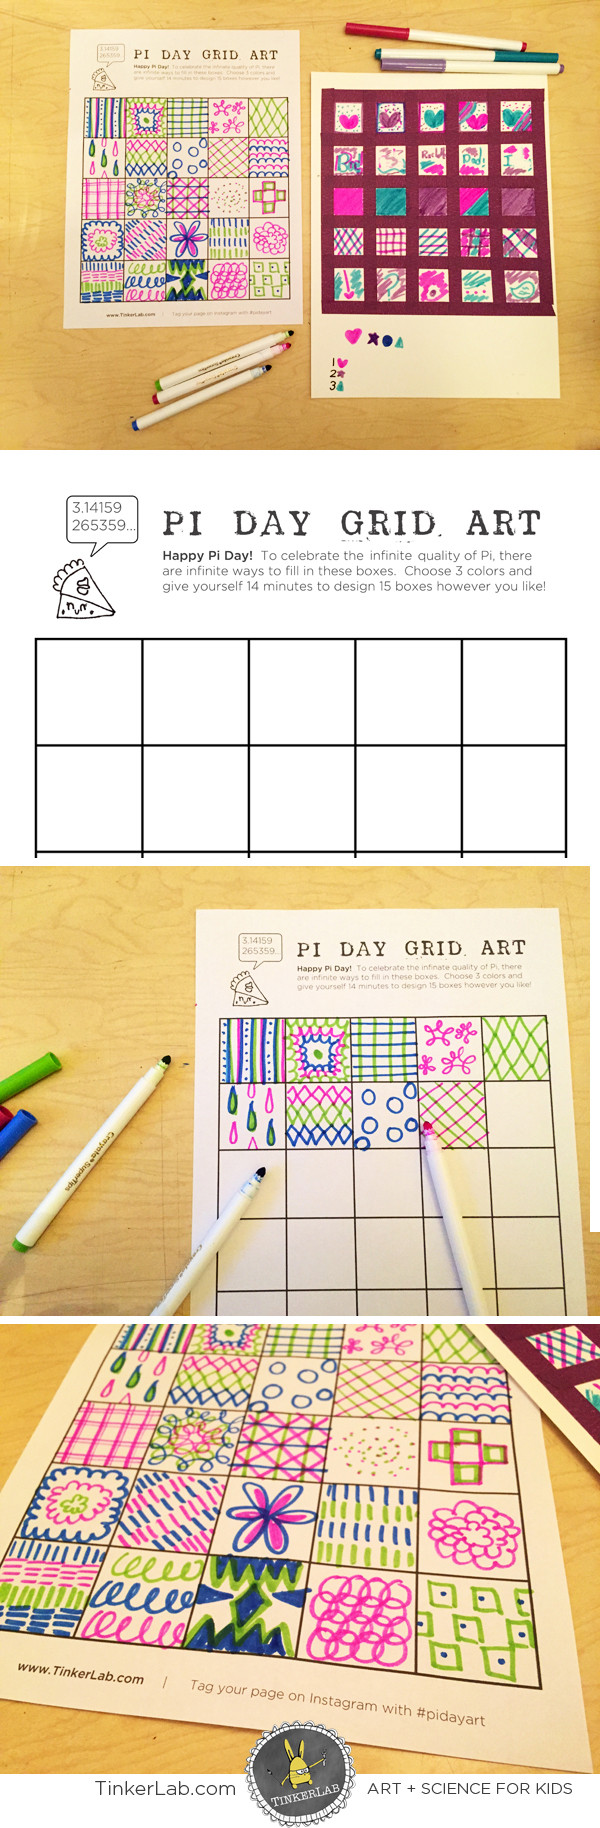 Pi Day Project Ideas For School
 Pi Day 2015 Pi Day Art Project